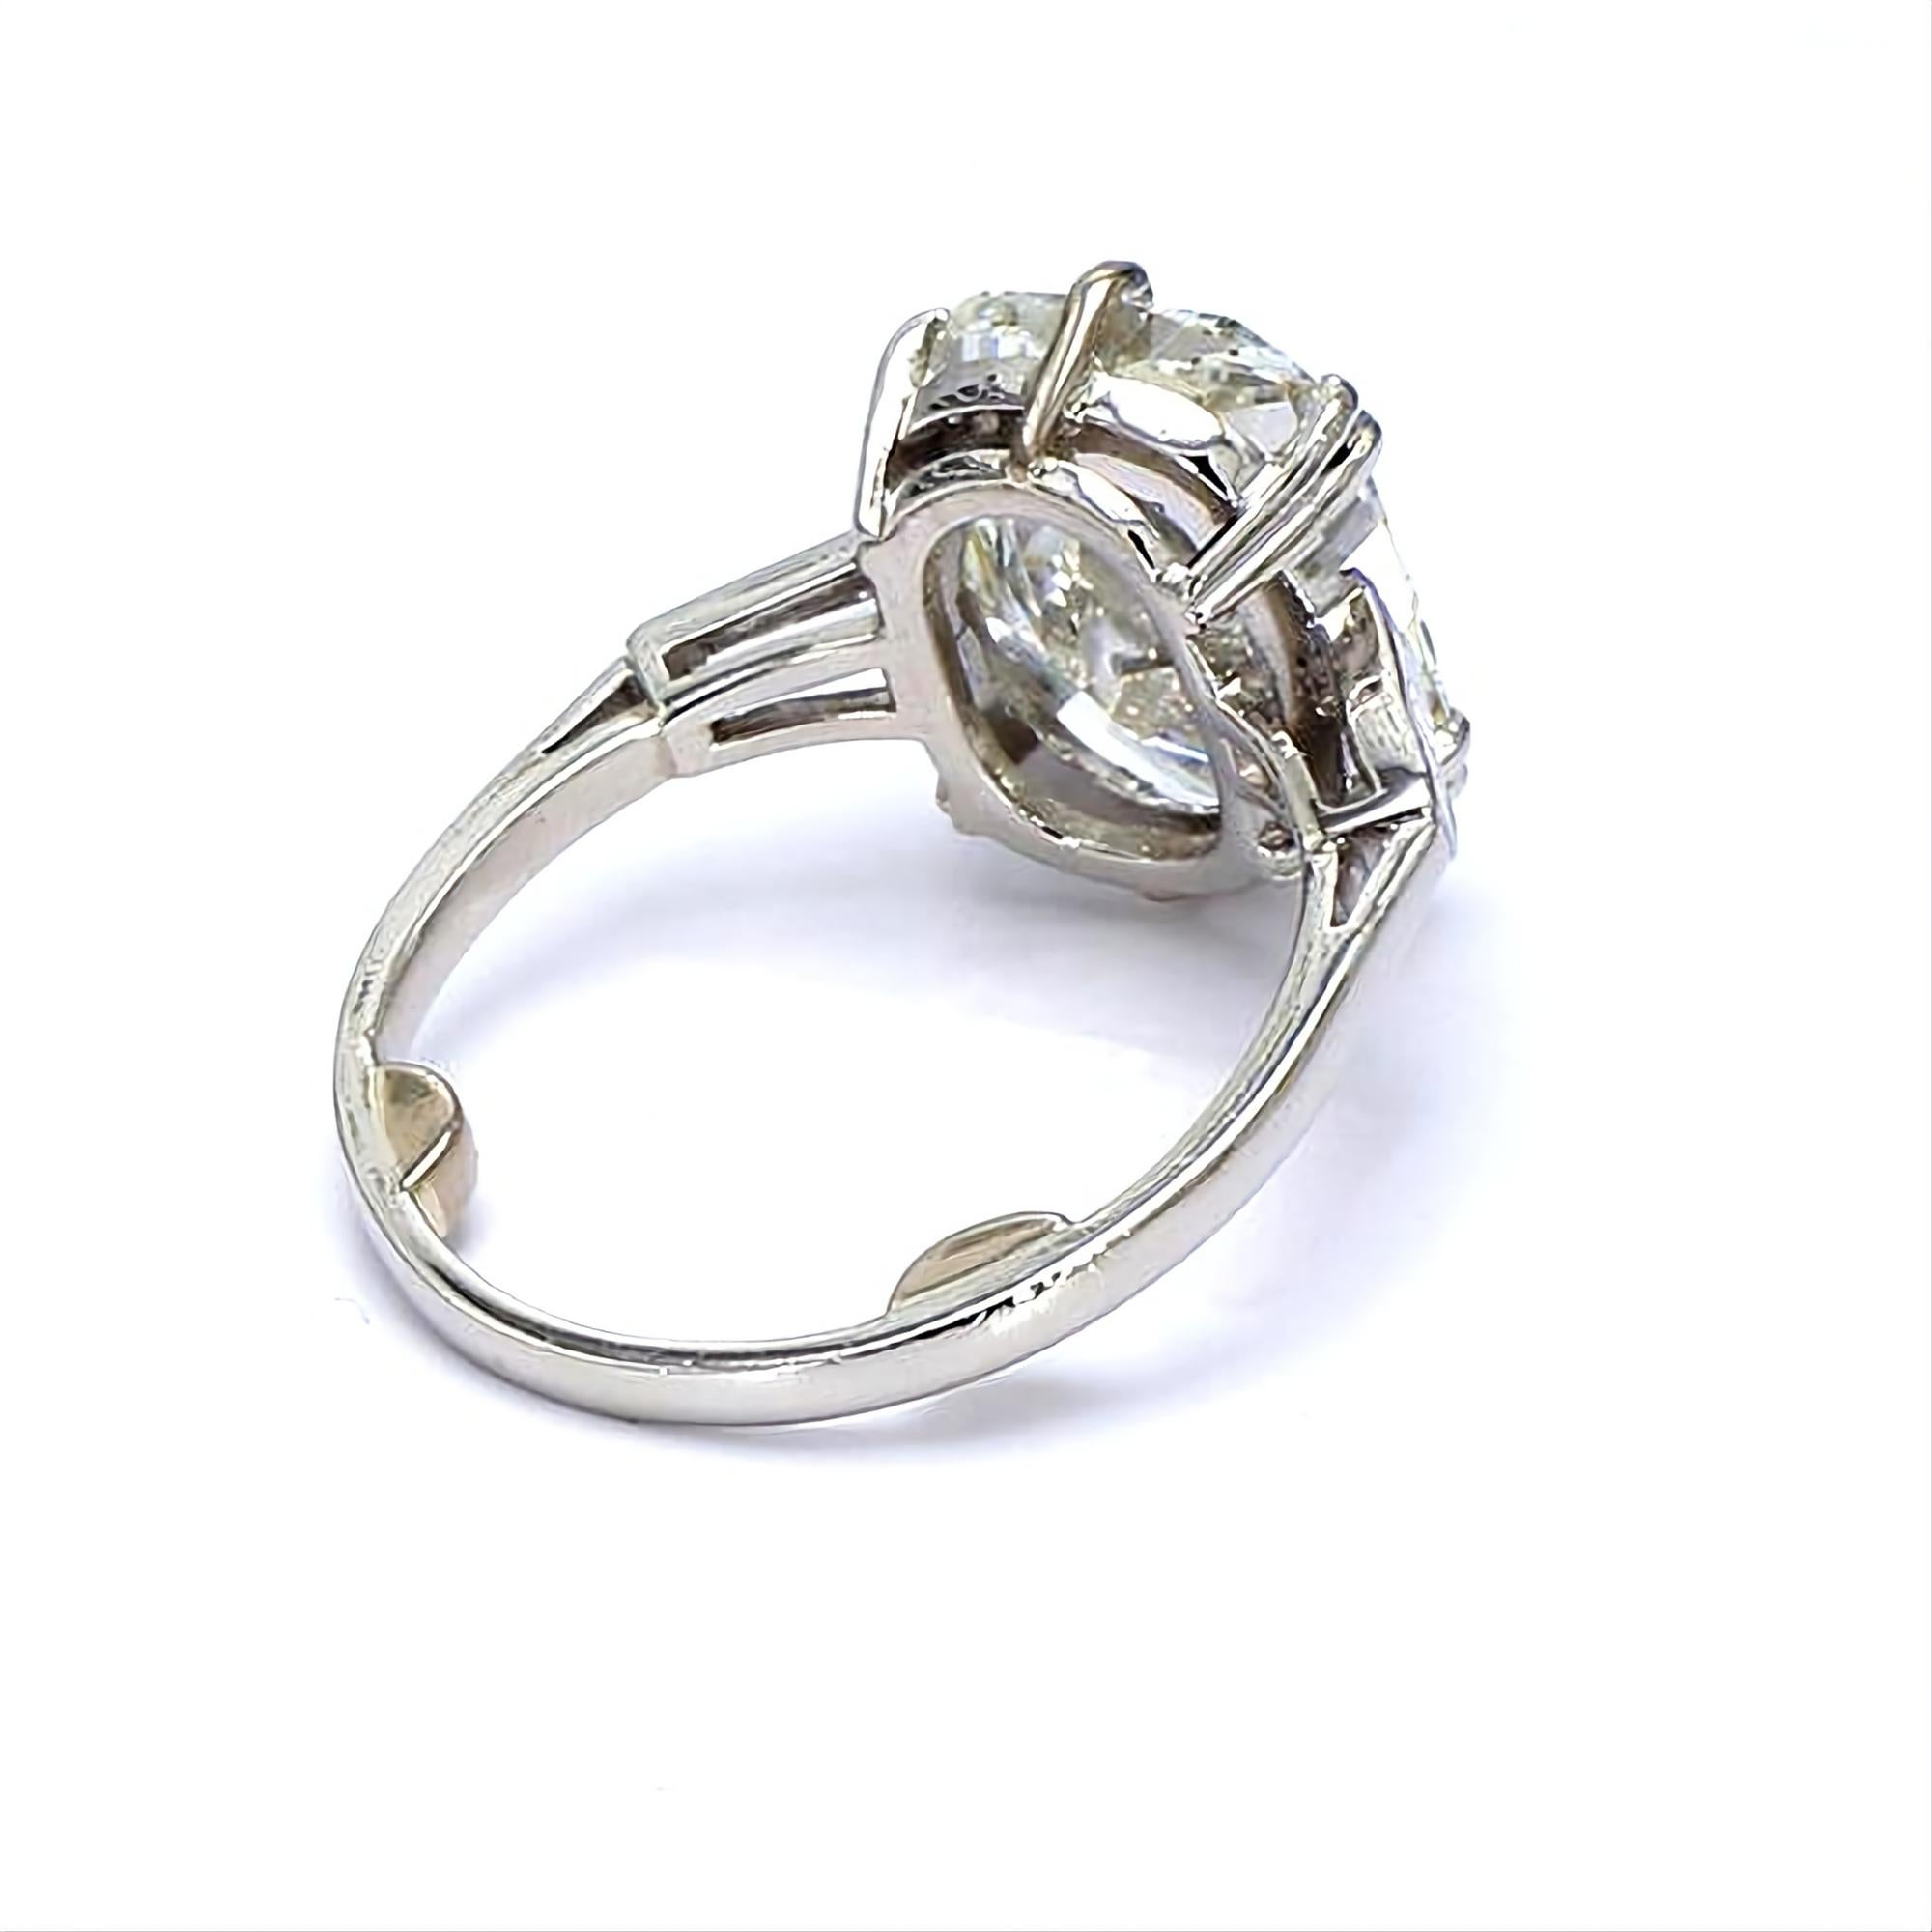 This Late Art Deco Huge GIA 5.04ctw Cushion Cut 3 Stone Diamond Platinum Vintage Ring is breathtaking! 
There is nothing more ELEGANT than Three Stone Diamond ring. Buy her this impressive and the most classic, timeless diamond ring which will go